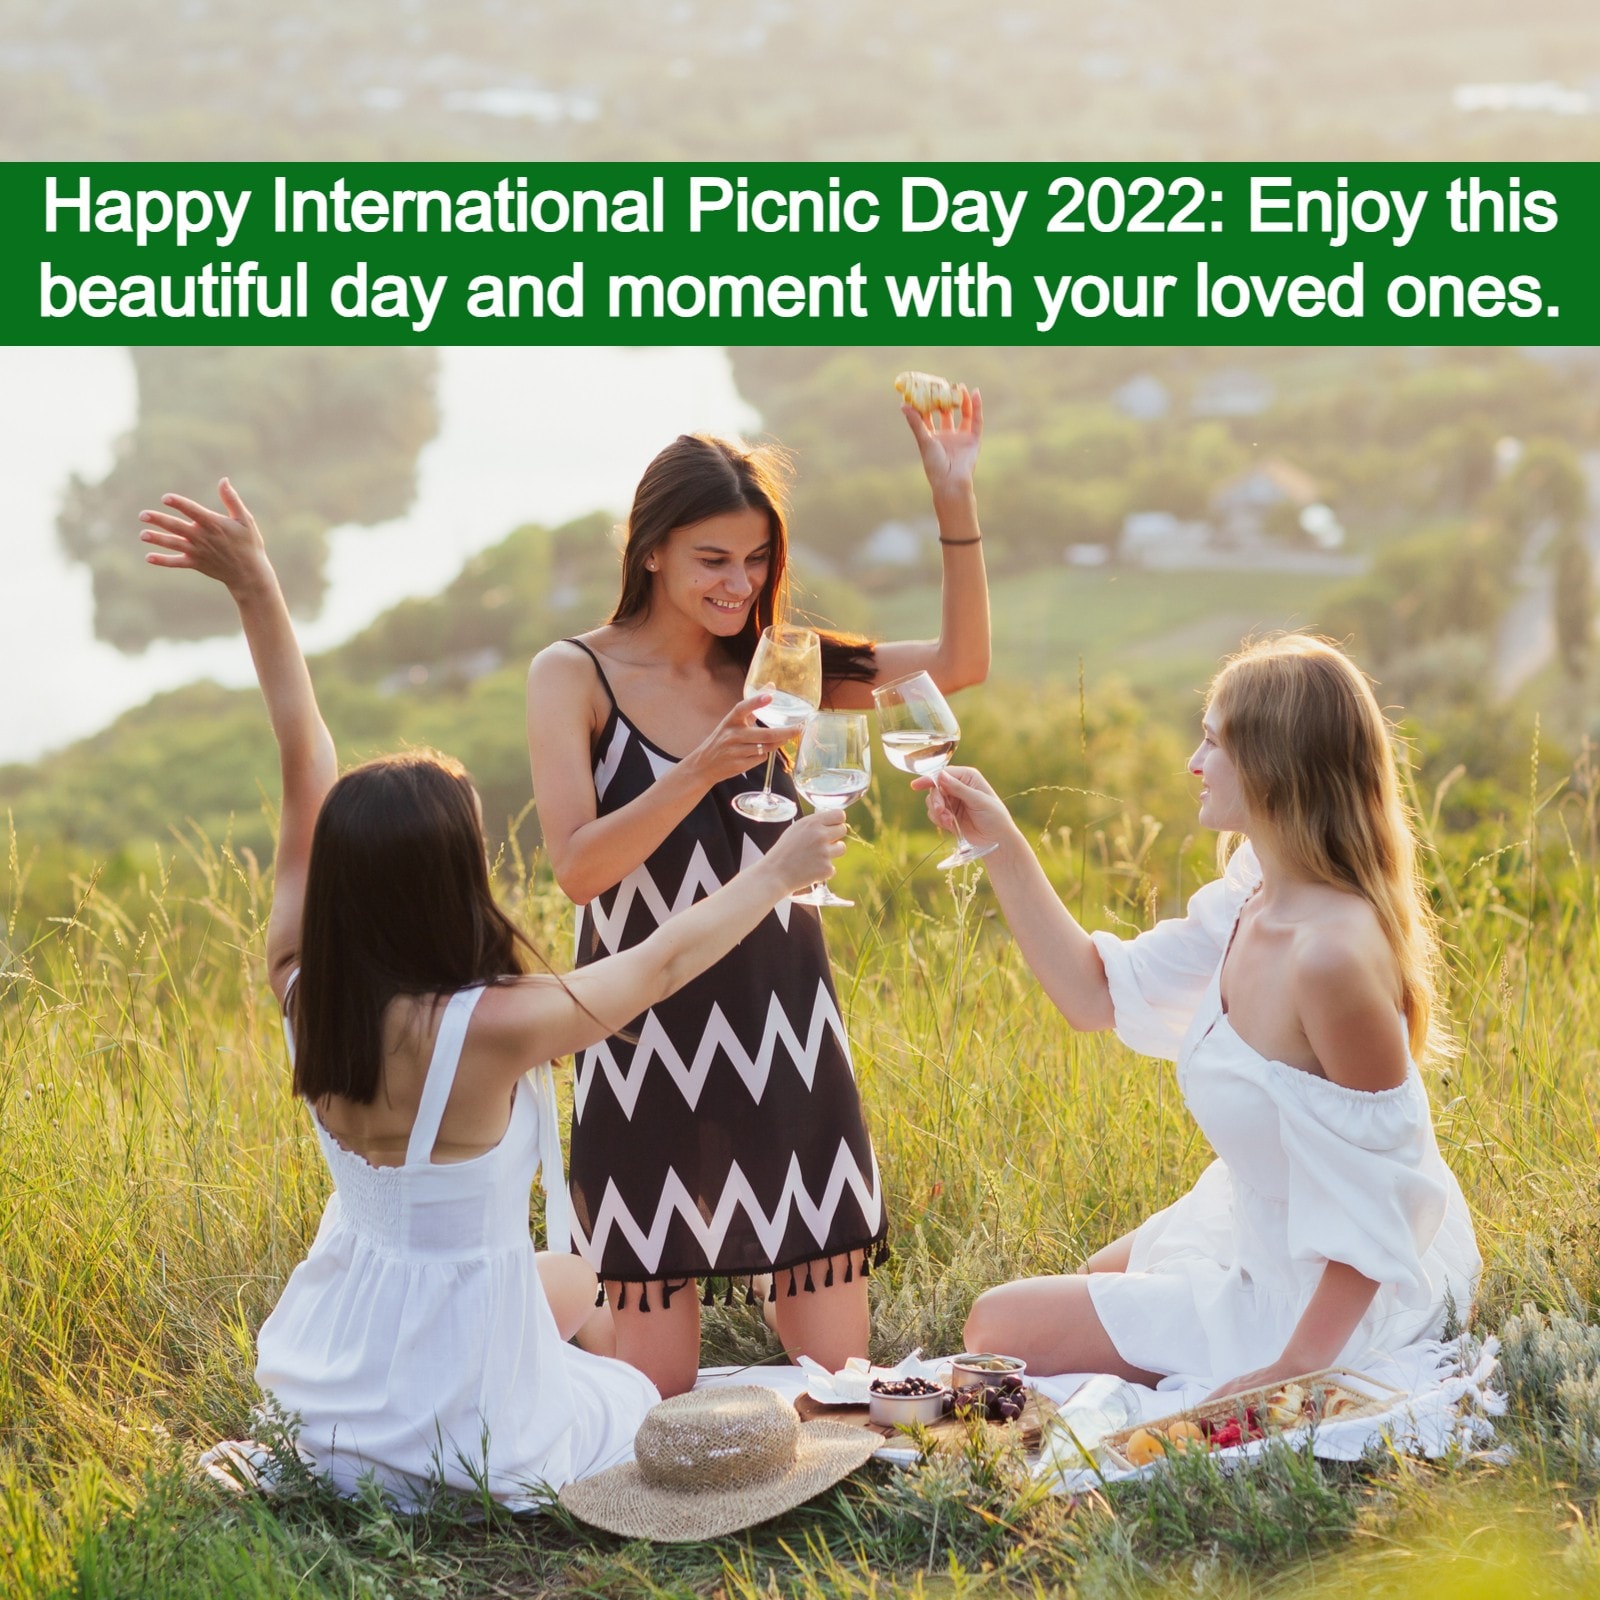 Happy International Picnic Day 2022 Date, wishes, images, greeting and quotes that you can share with your family, friends, relatives and colleagues 